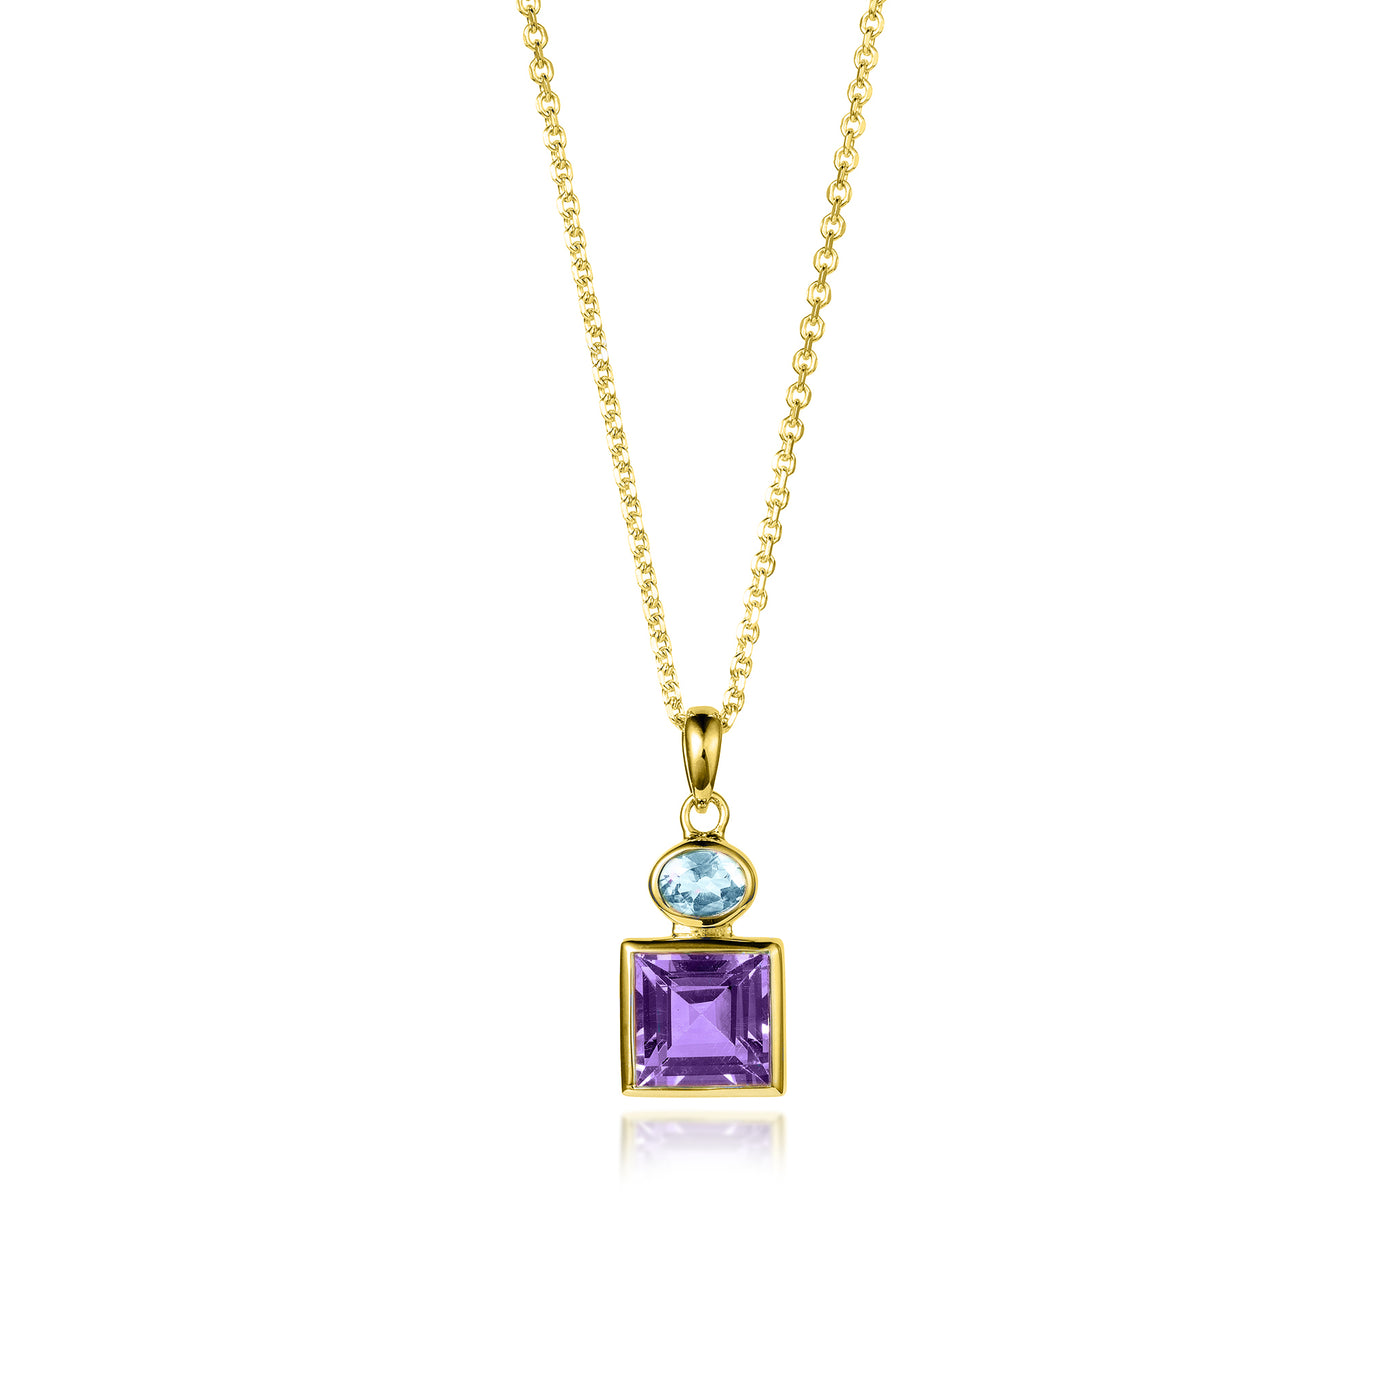 Photo of Gold Amethyst and Blue Topaz Pendant Necklace